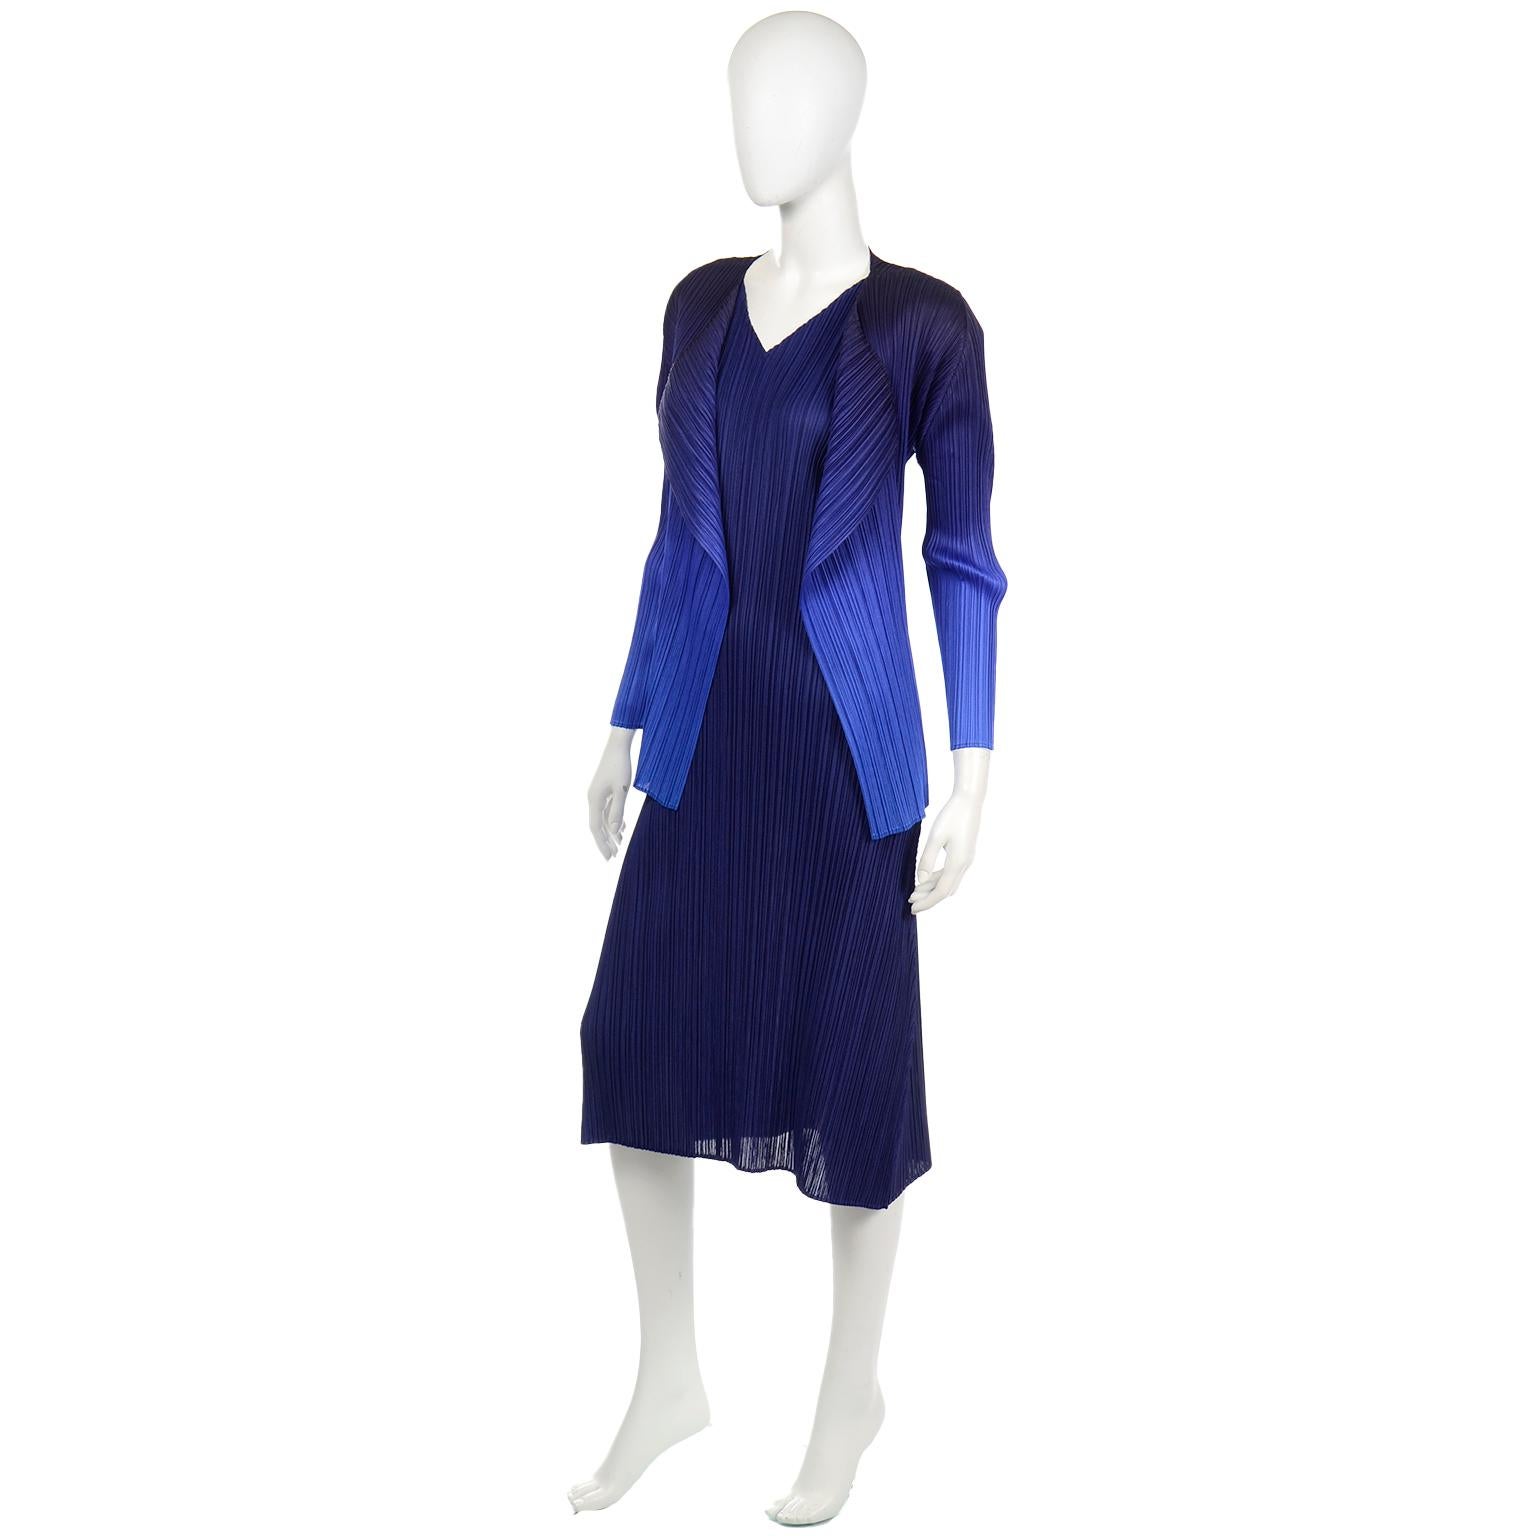 Issey Miyake Pleats Please Blue Dress & Ombre Jacket Outfit 2